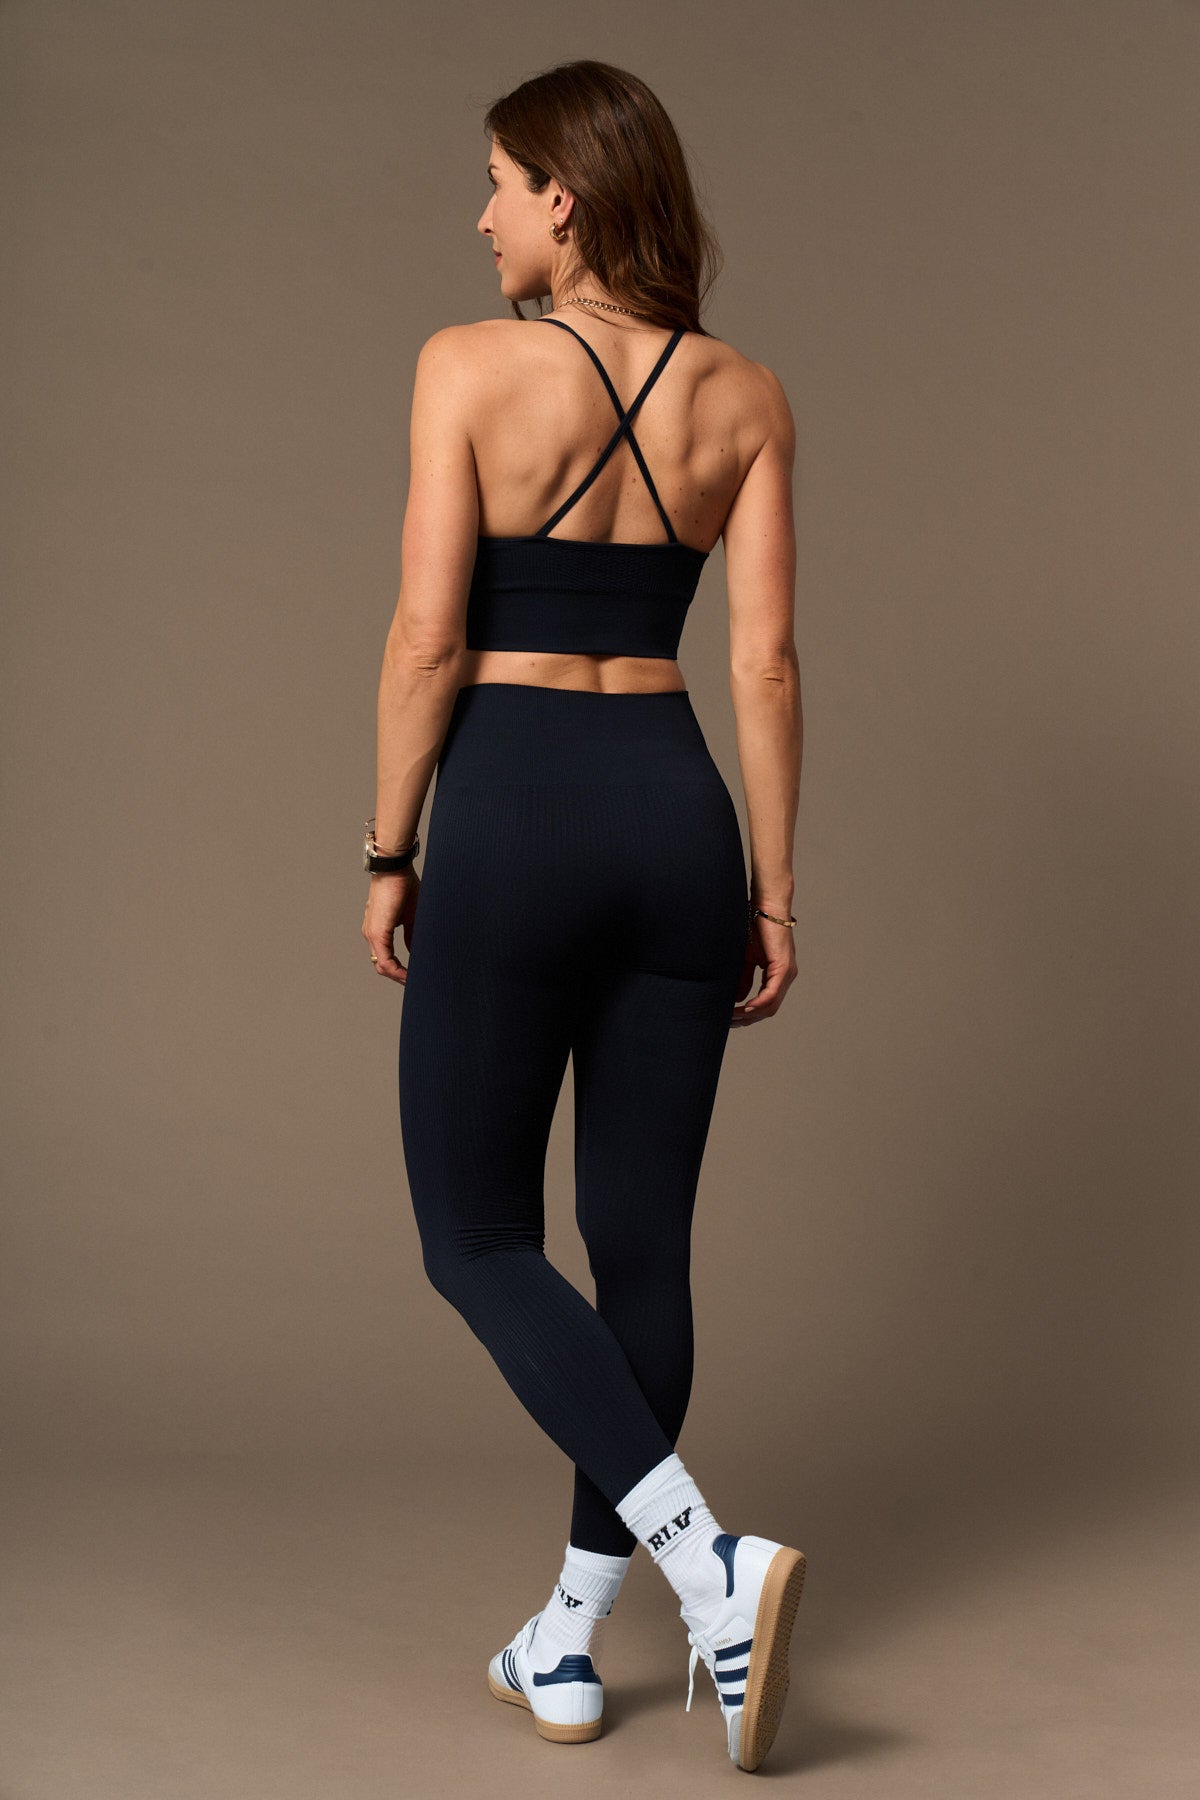 Flow Legging in Black-Long Leggings-Store Clothing Sustainable Recycled Yoga Leggings Women On-line Barcelona Believe Athletics Sustainable Recycled Yoga Clothes